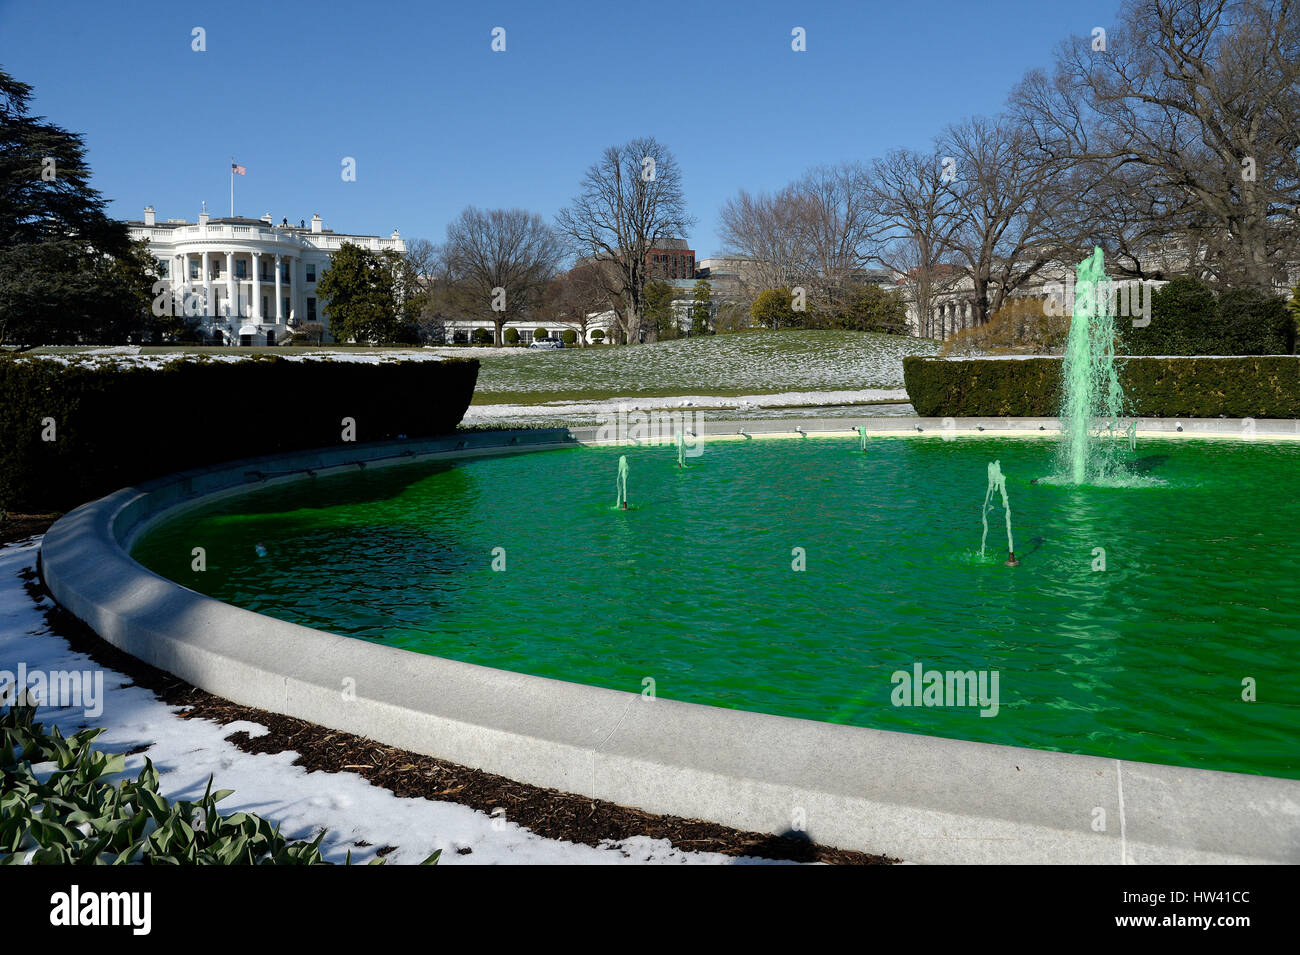 Washington DC, USA. 16th March 2017. Fountain on the South side of the White House is dyed green for St. Patrick's Day in Washington, DC, on March 16, 2017 in Washington, DC. Credit: Olivier Douliery/Pool via CNP /MediaPunch/Alamy Live News Stock Photo